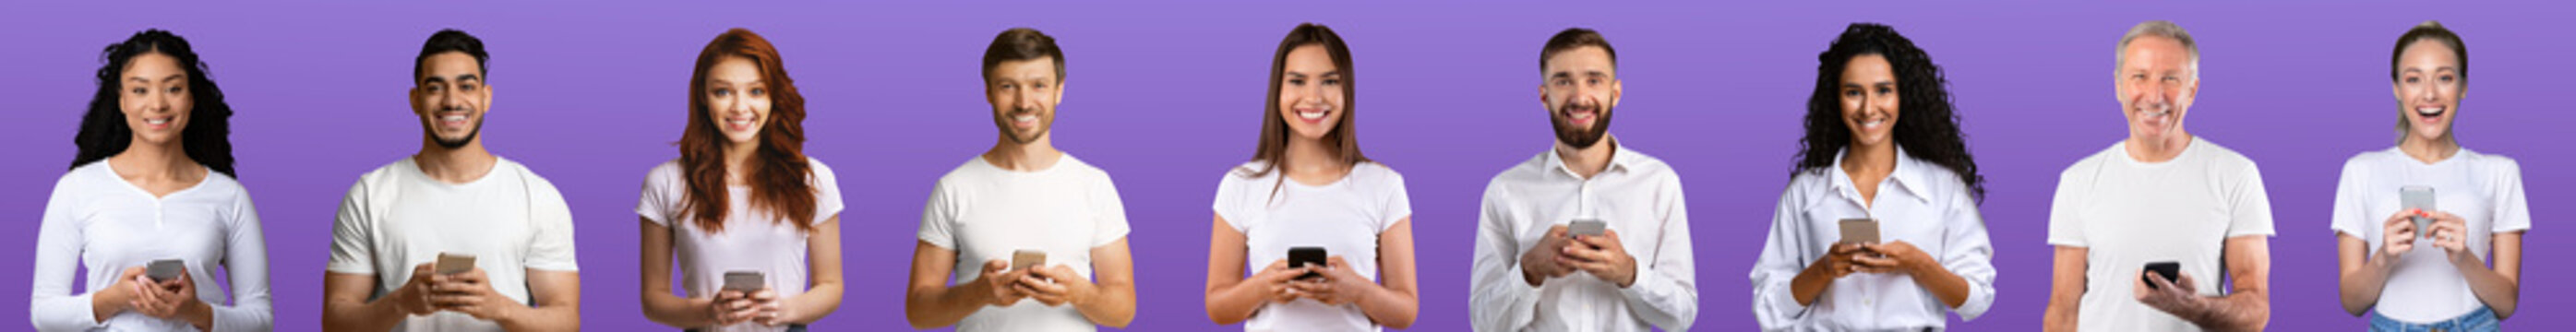 Smiling young and old european men and women in white clothes with smartphones